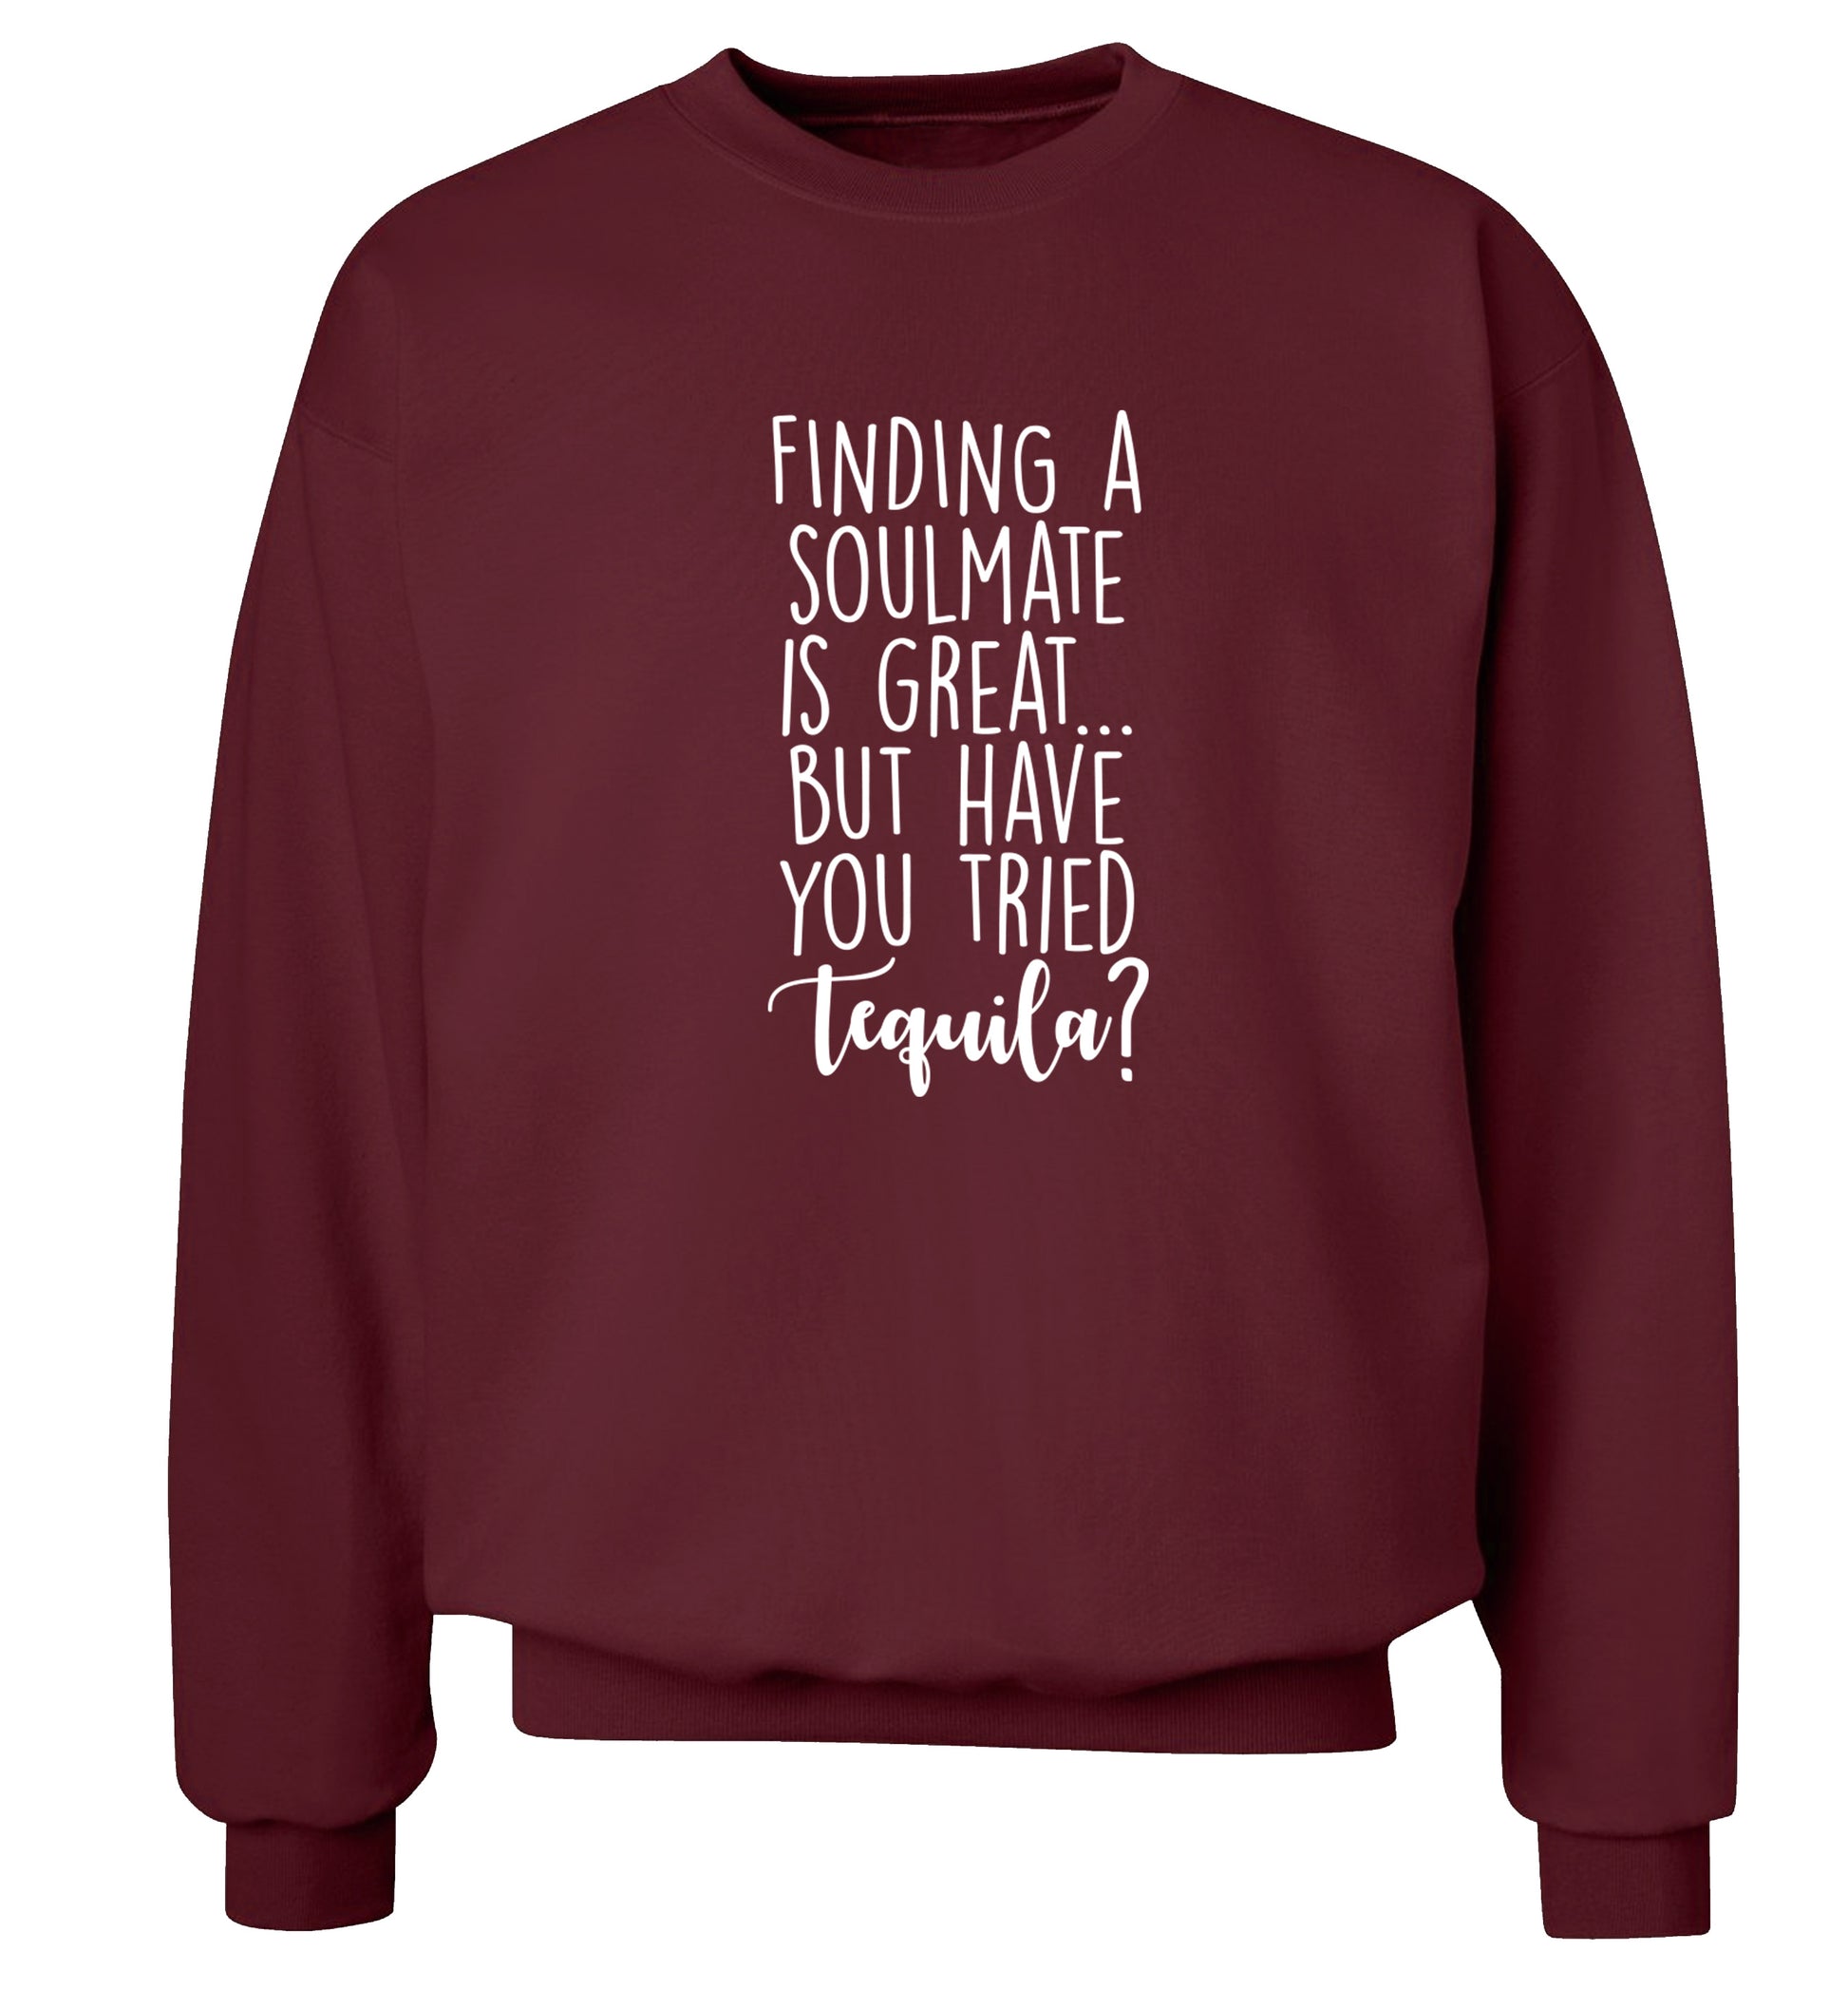 Finding a soulmate is great but have you tried tequila? Adult's unisex maroon Sweater 2XL